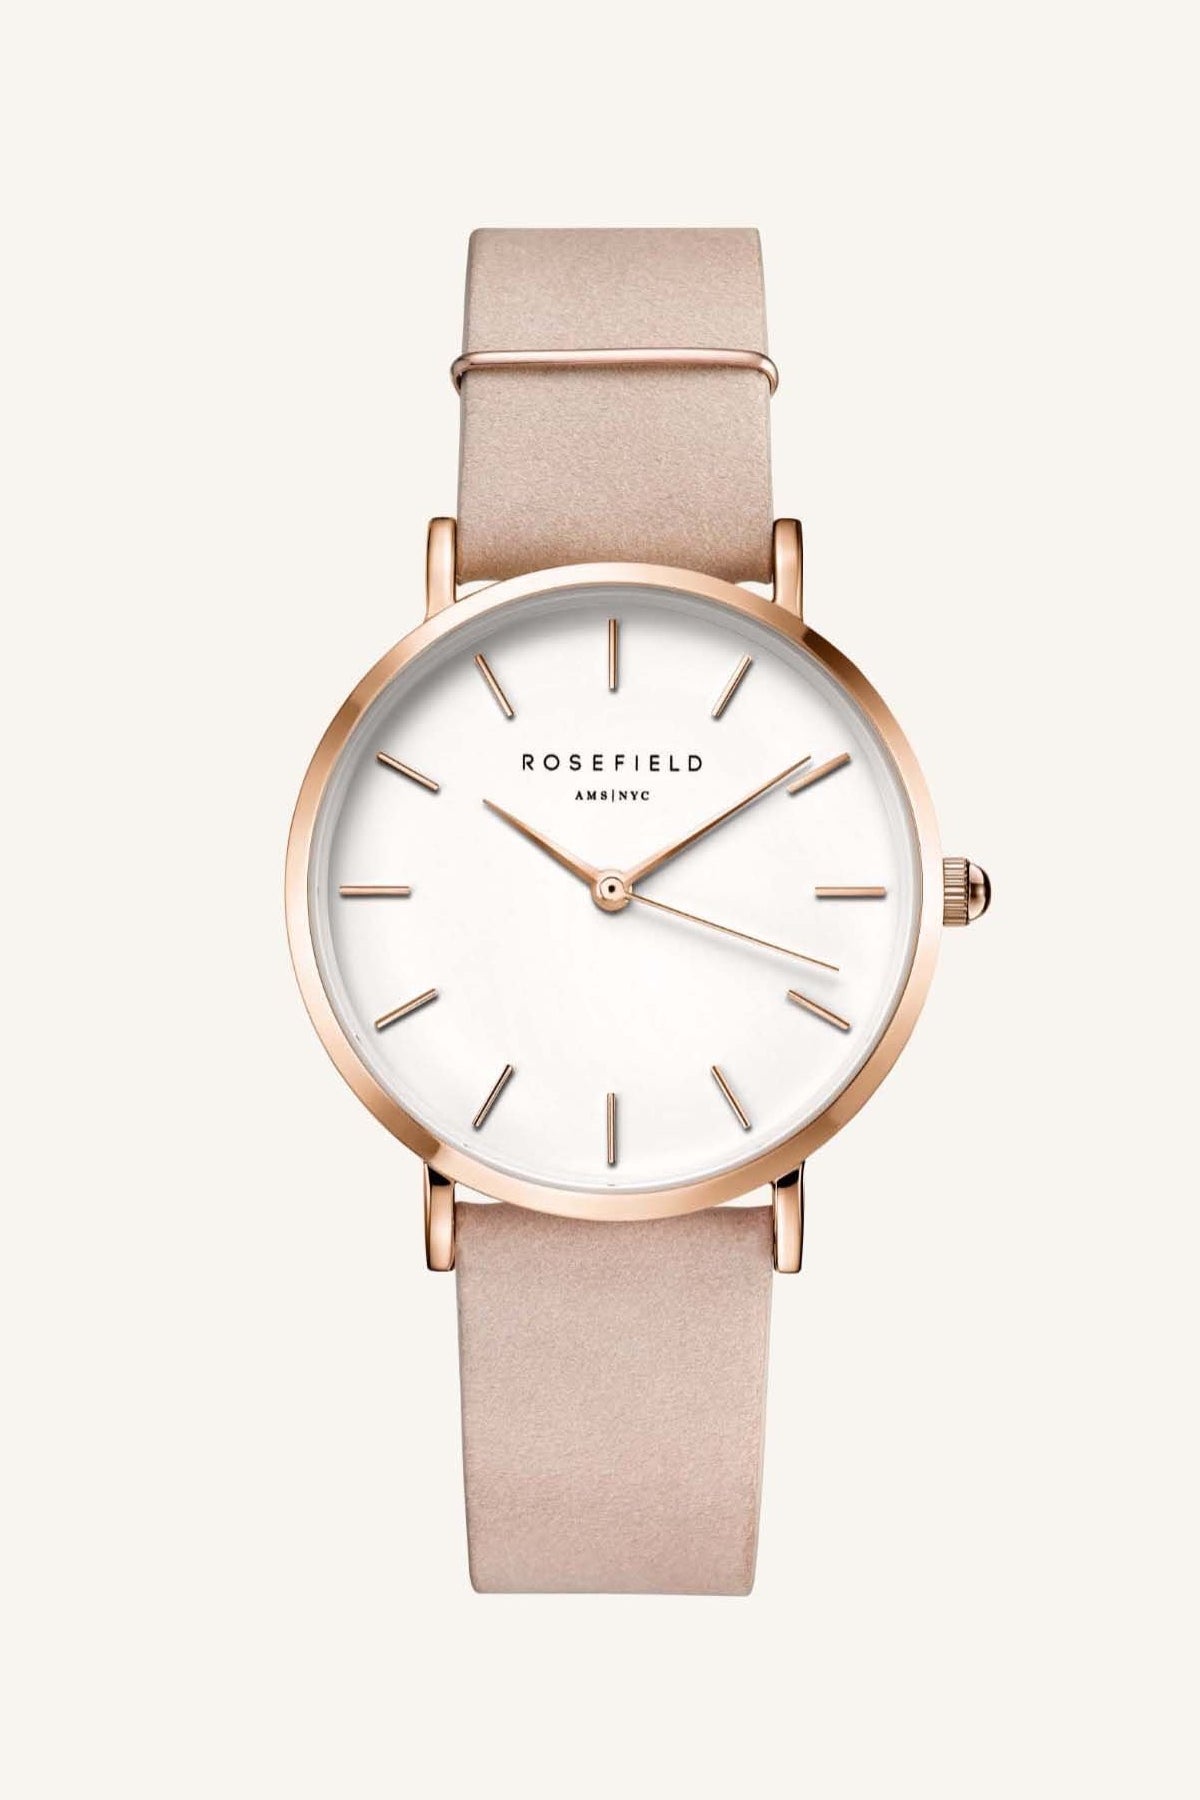 ROSEFIELD WEST VILLAGE WATCH  The Rosefield West Village Watch is a beautiful feminine watch sporting unique metal plated rings for added individuality and style, this watch effortlessly compliments any outfit weather it be causal or formal!  The West Village Watch features a subtle pearl sheen on the face, has a raw-cut unstitched leather strap, and is perfect for daily or occasion wear.